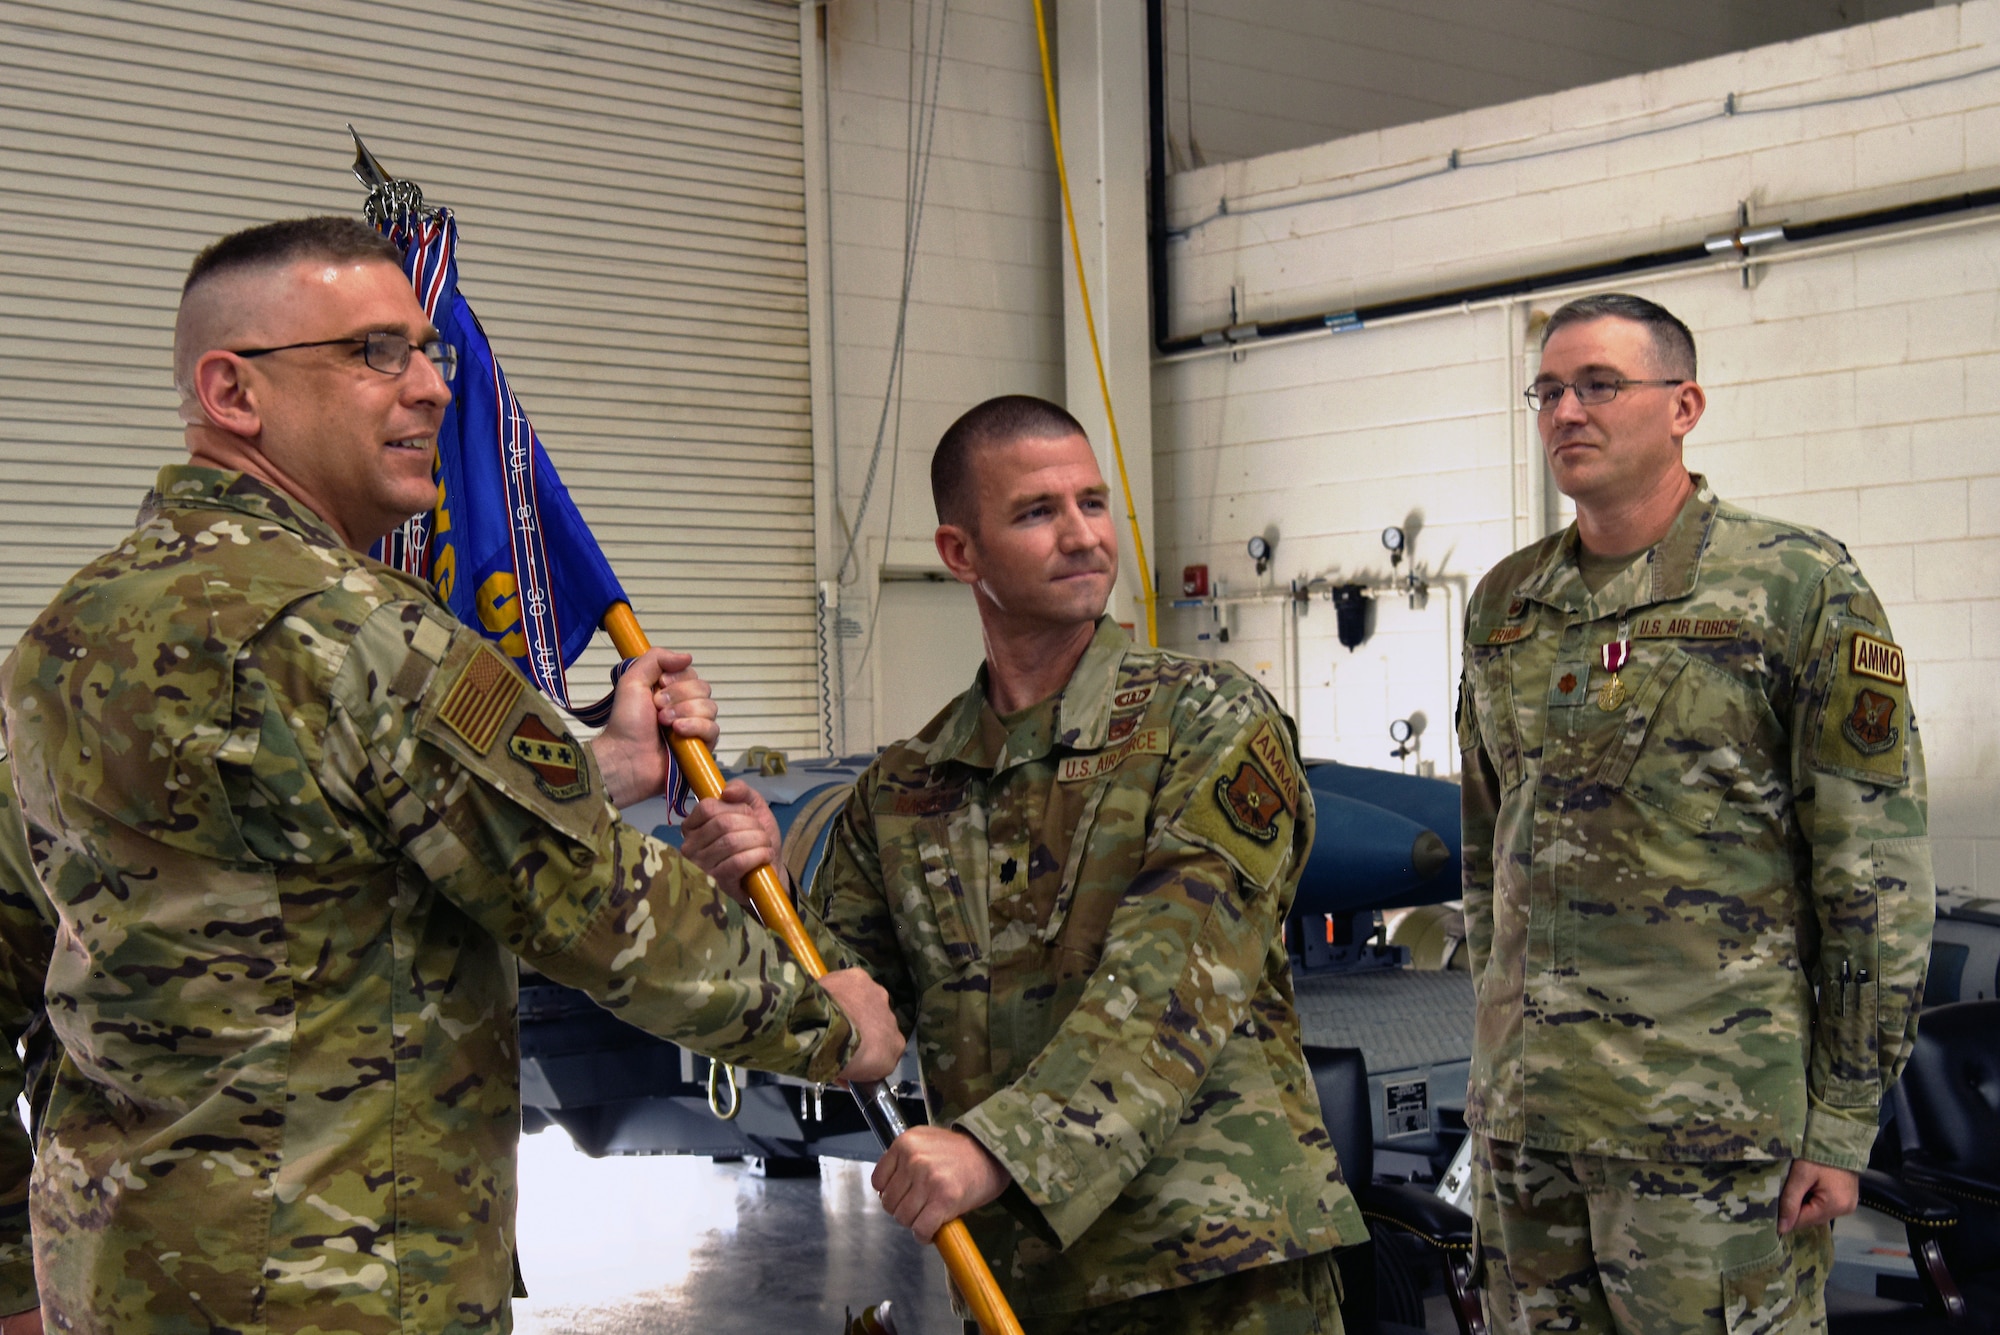 Lt. Col. Craig Rasley, incoming commander of the 7th Munitions Squadron, accepts the guidon on Dyess Air Force Base Texas, 16 Jun 2022. Changes of command in the military are a tradition that formally represent the transfer of authority from one leader to another. (U.S. Air Force photo by Senior Airman Sophia Robello)